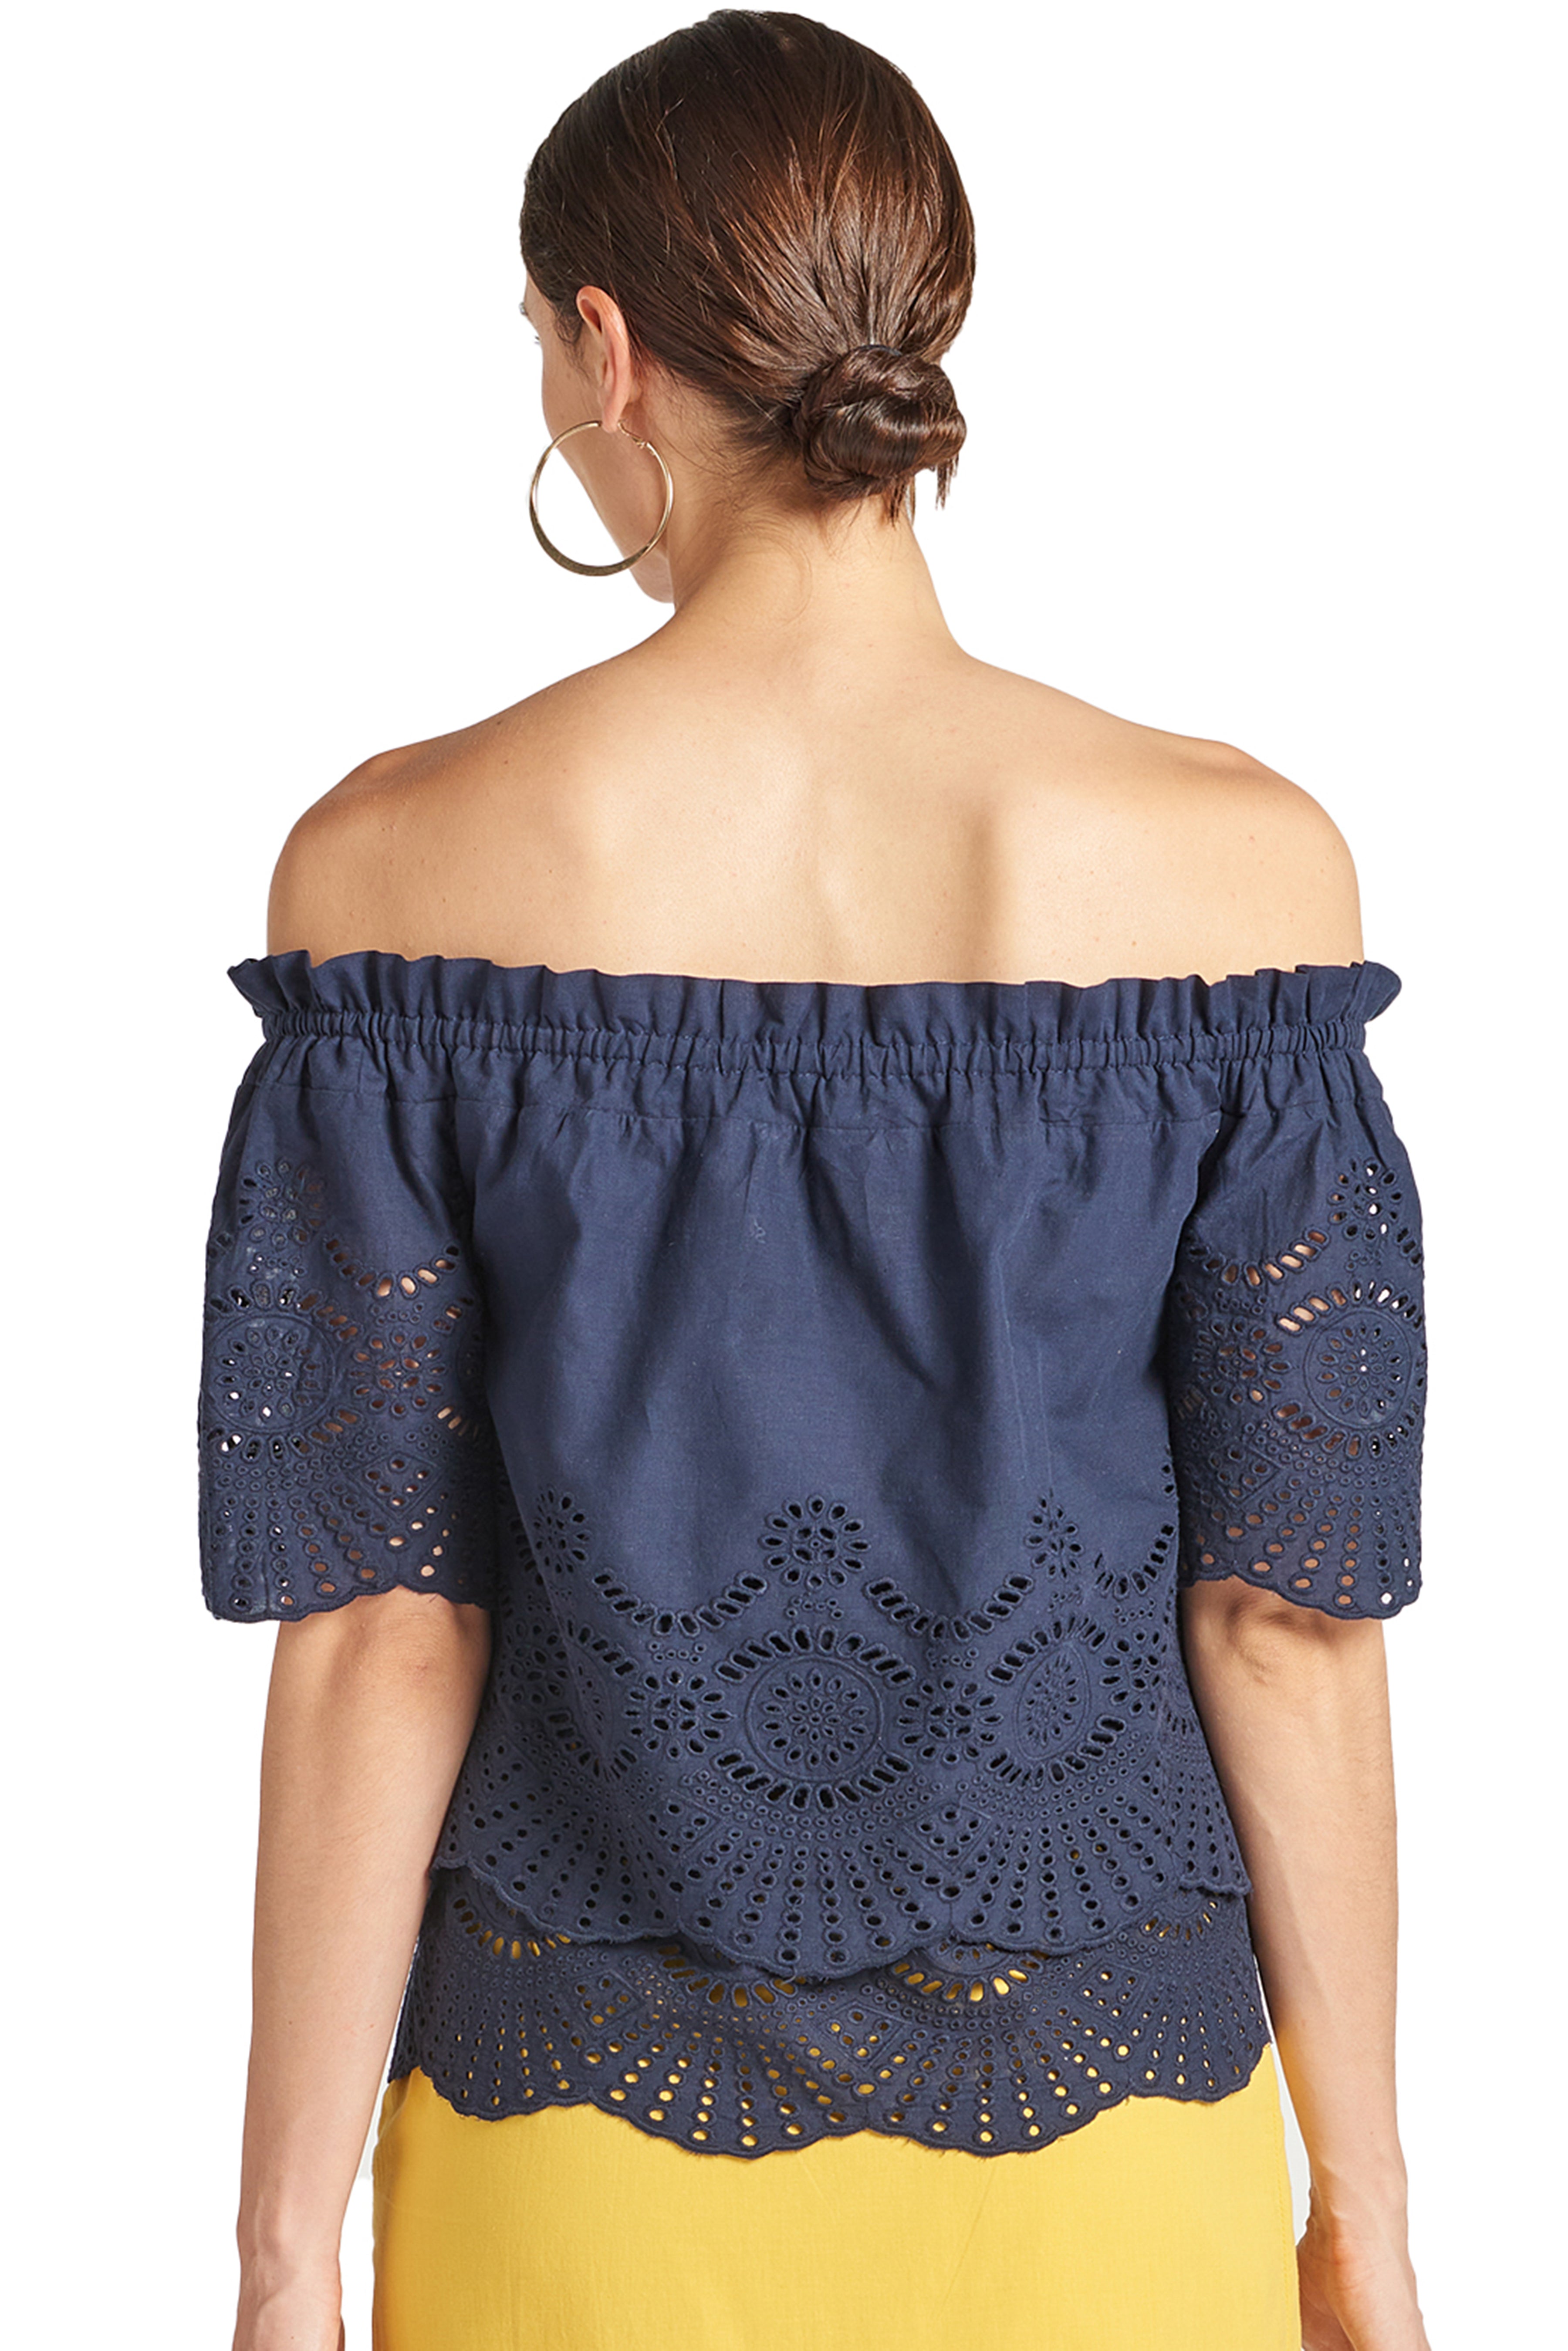 Back  view of model wearing navy off the shoulder cotton eyelet top with scalloped short sleeves and scalloped bottom hem.